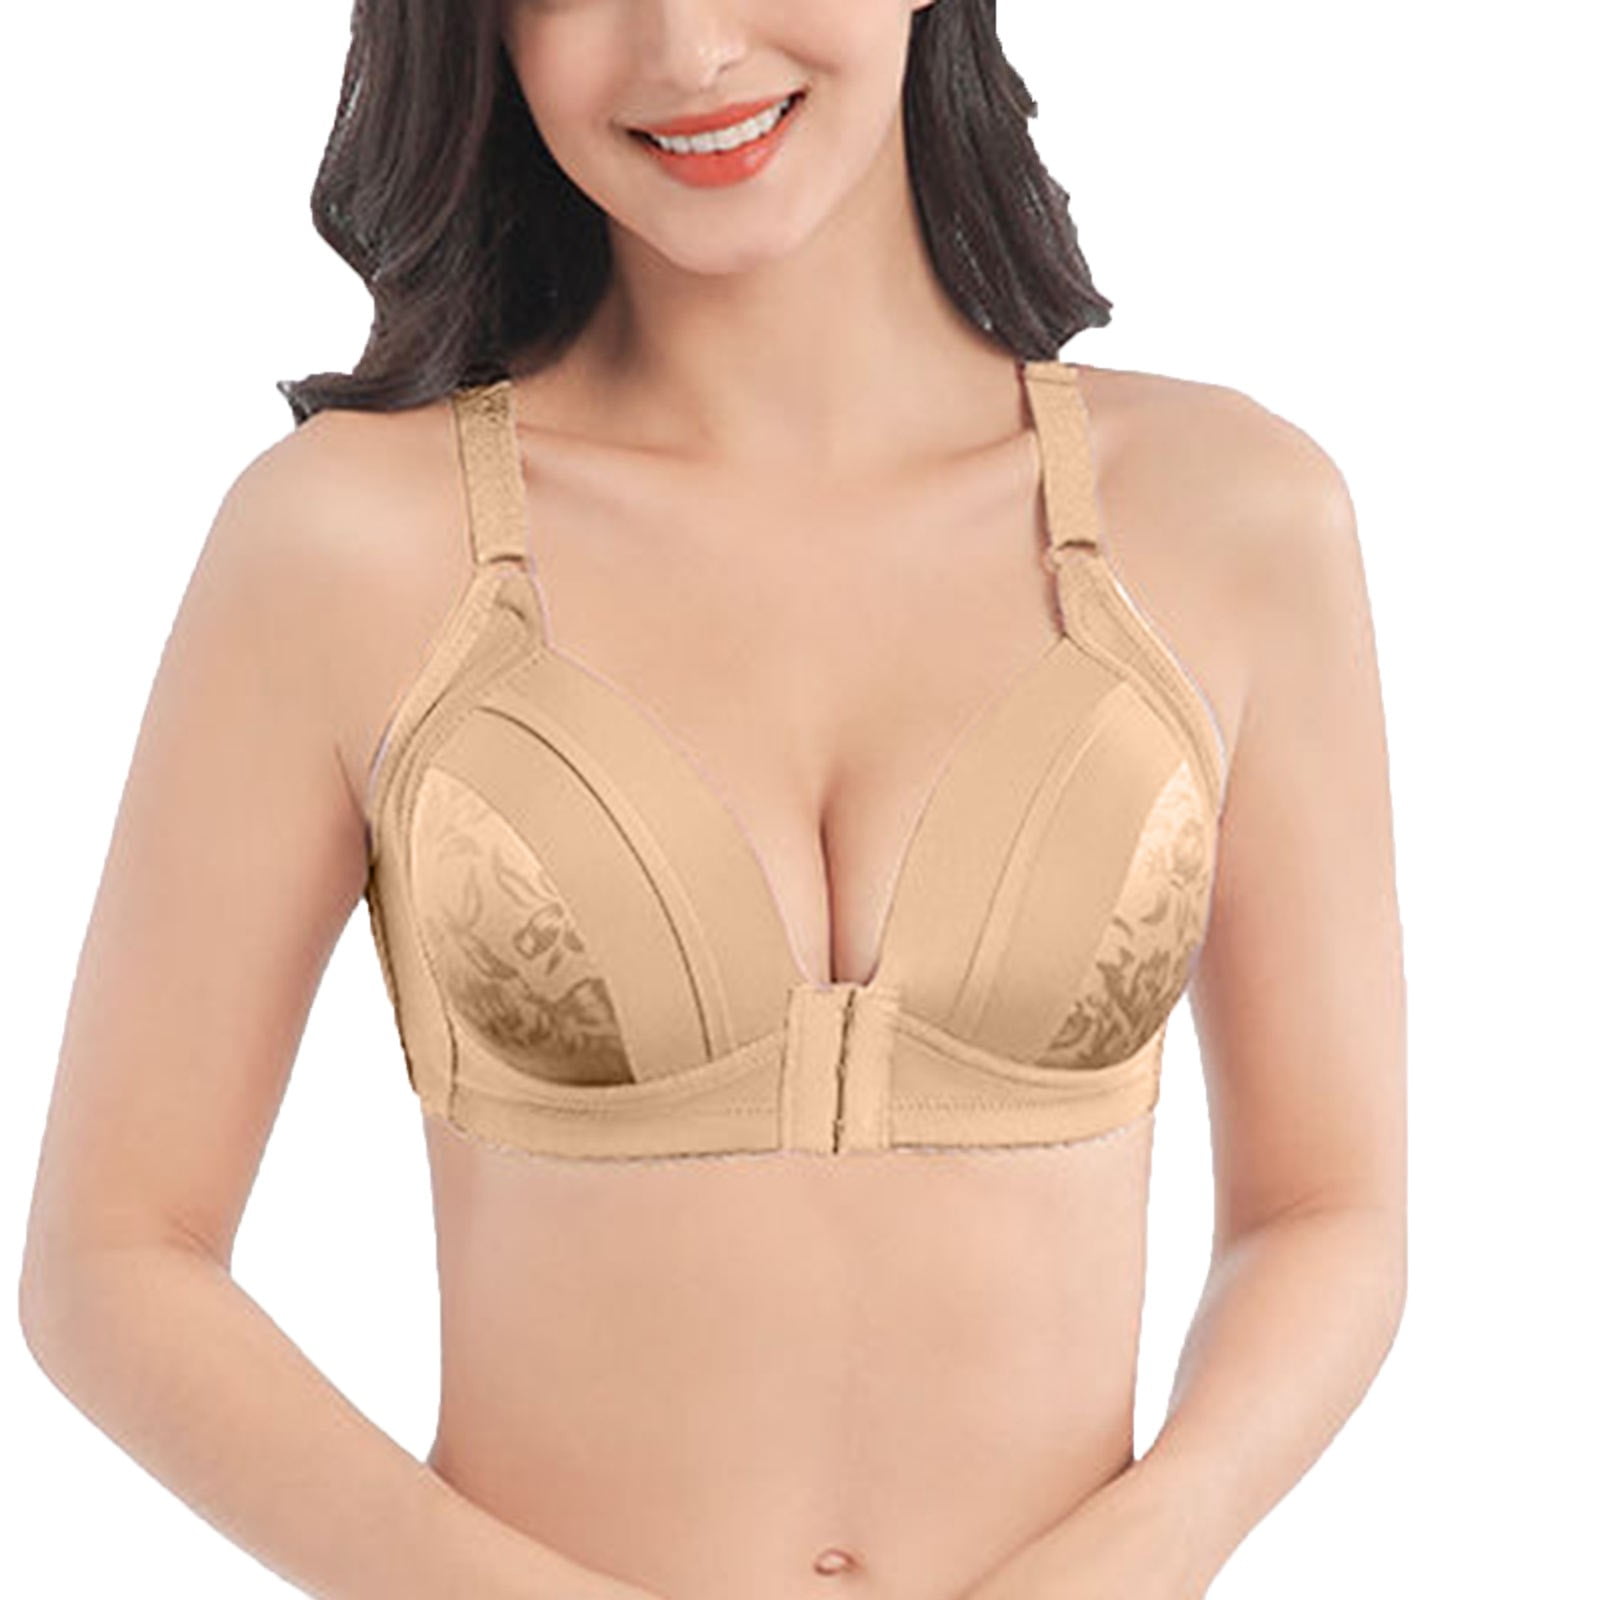 BRA WITH PADDING & NO PADDING STRAPLESS PUSH UP BRA (32 - 44) ADJUSTABLE  STRAPS BIG SIZE COTTON WIRE DETACHABLE WITH FOAM SKINTONE NUDE BRASSIERE  SIZE 32 34 36 38 40 42 44